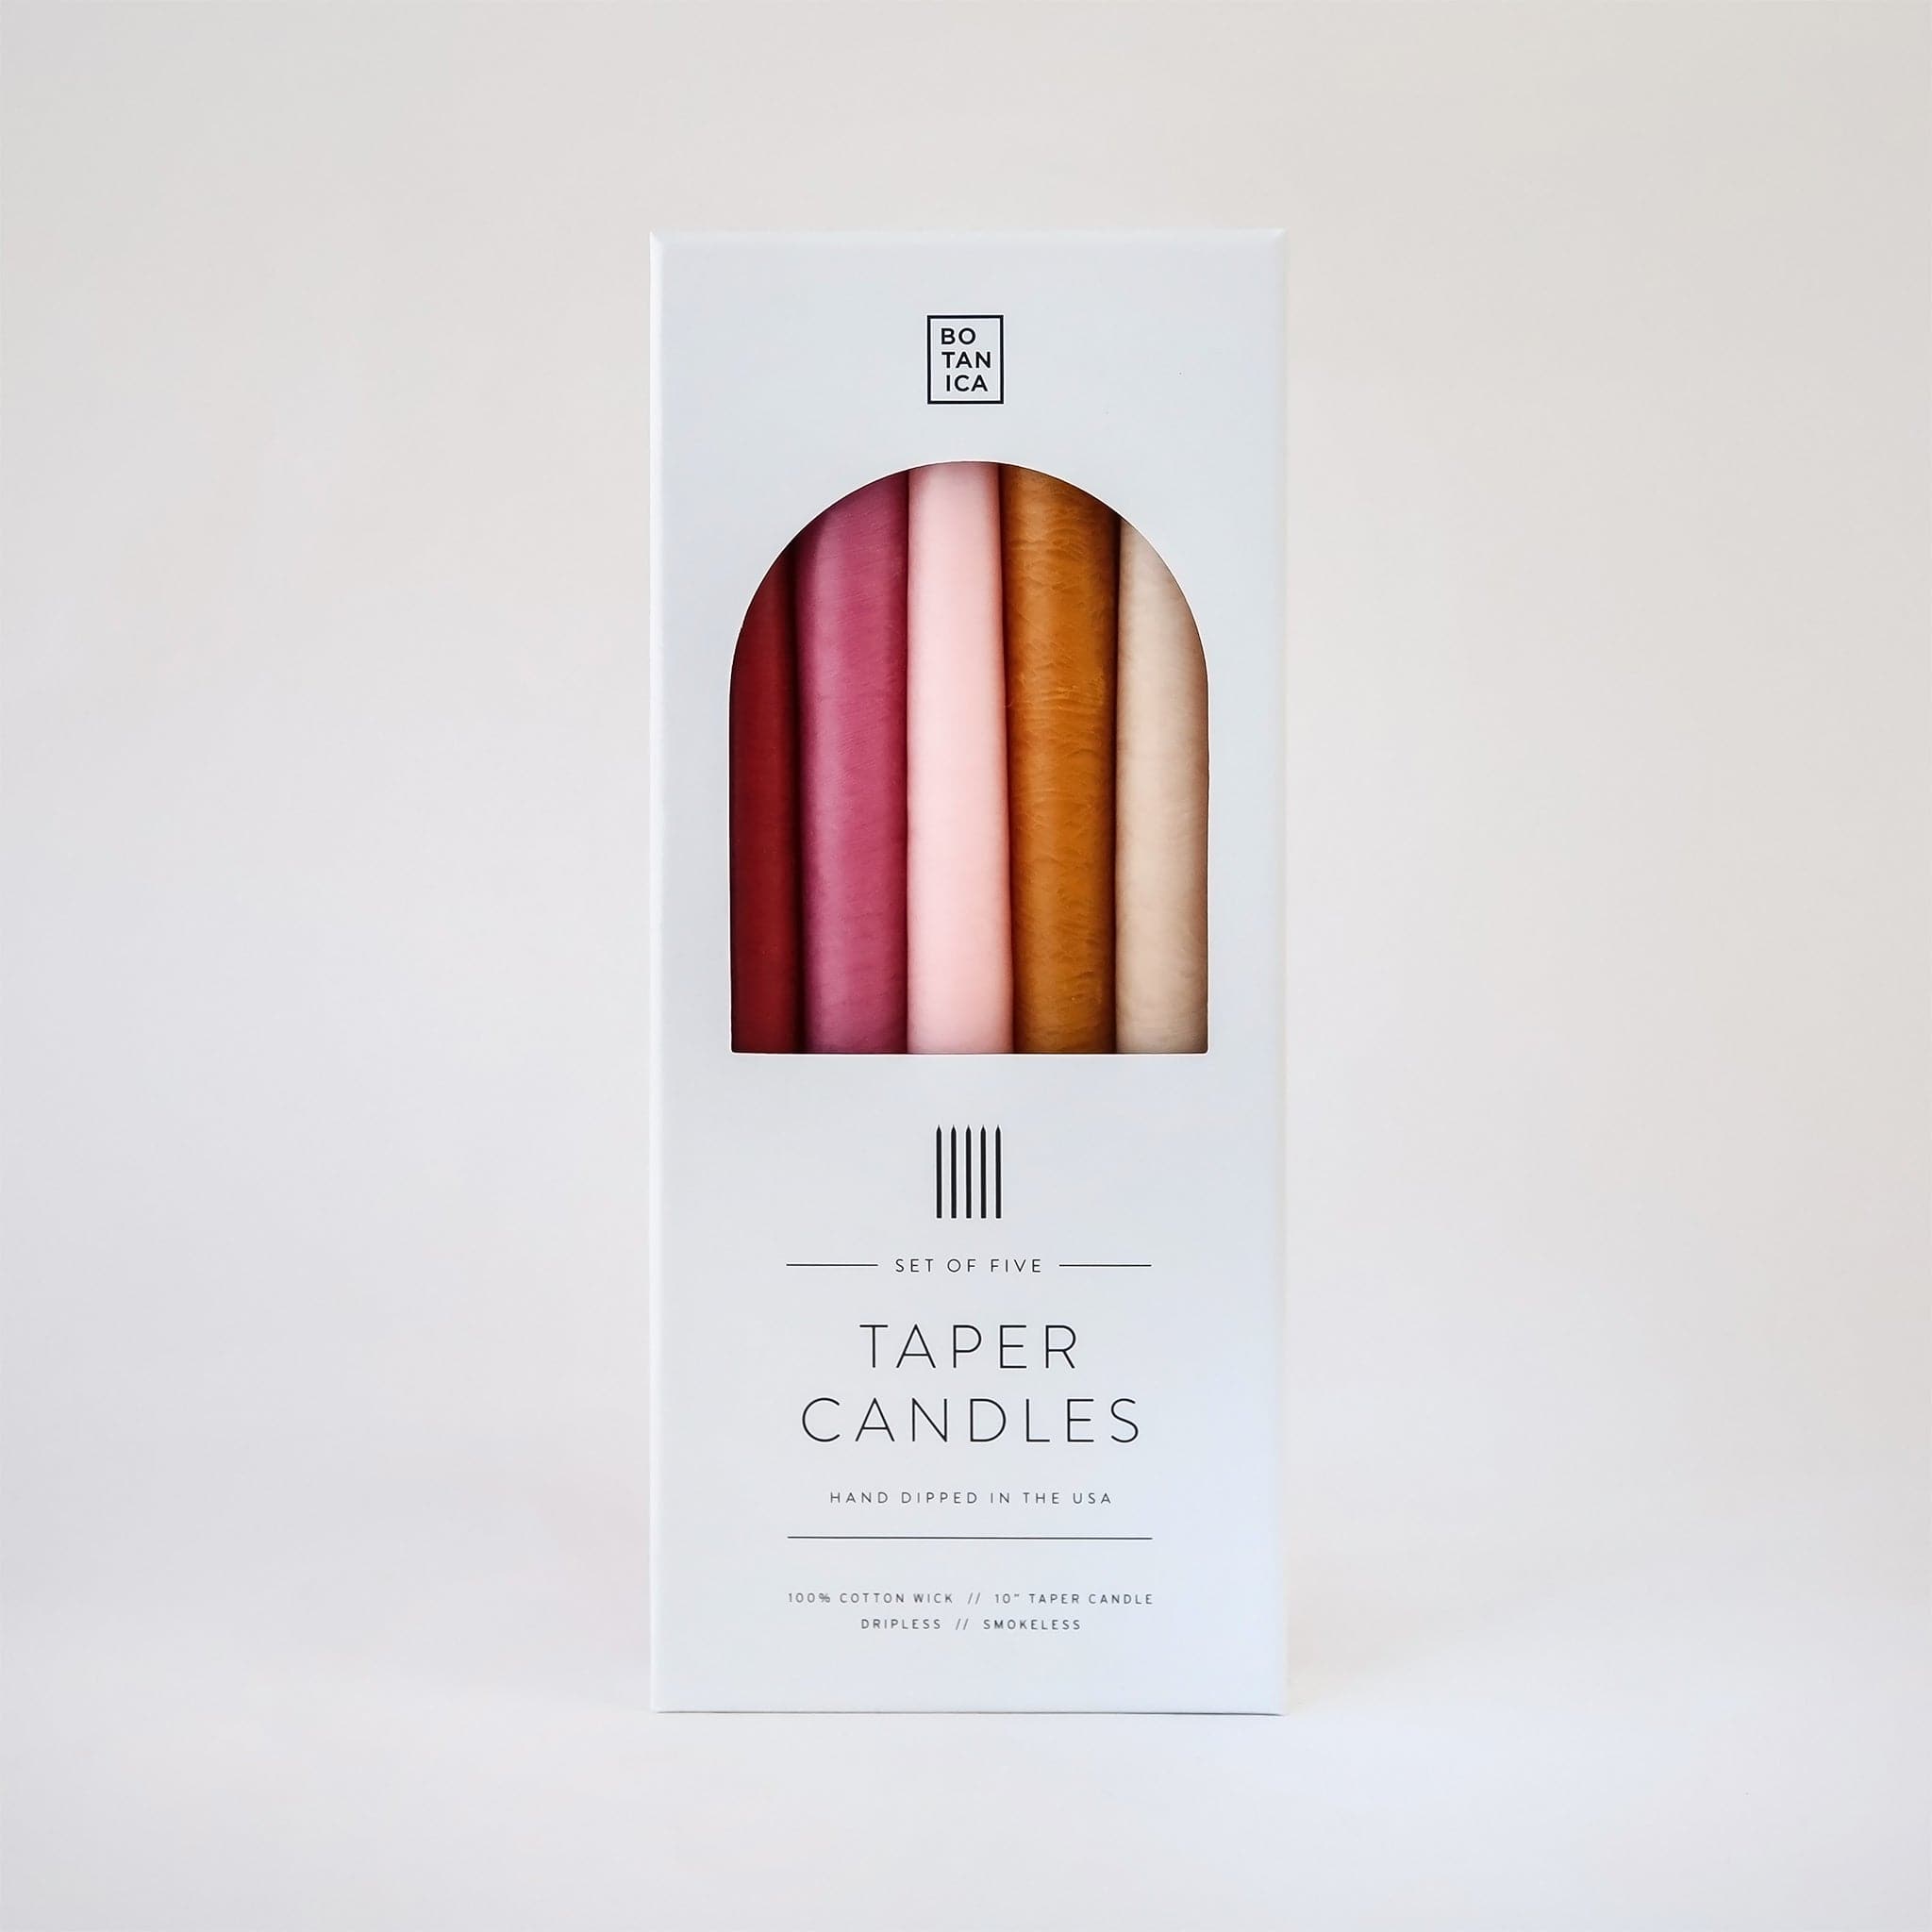 Set of five, 10 inch taper candles that come in warm toned red, pinks and oranges packaged in white Botanica branded box.